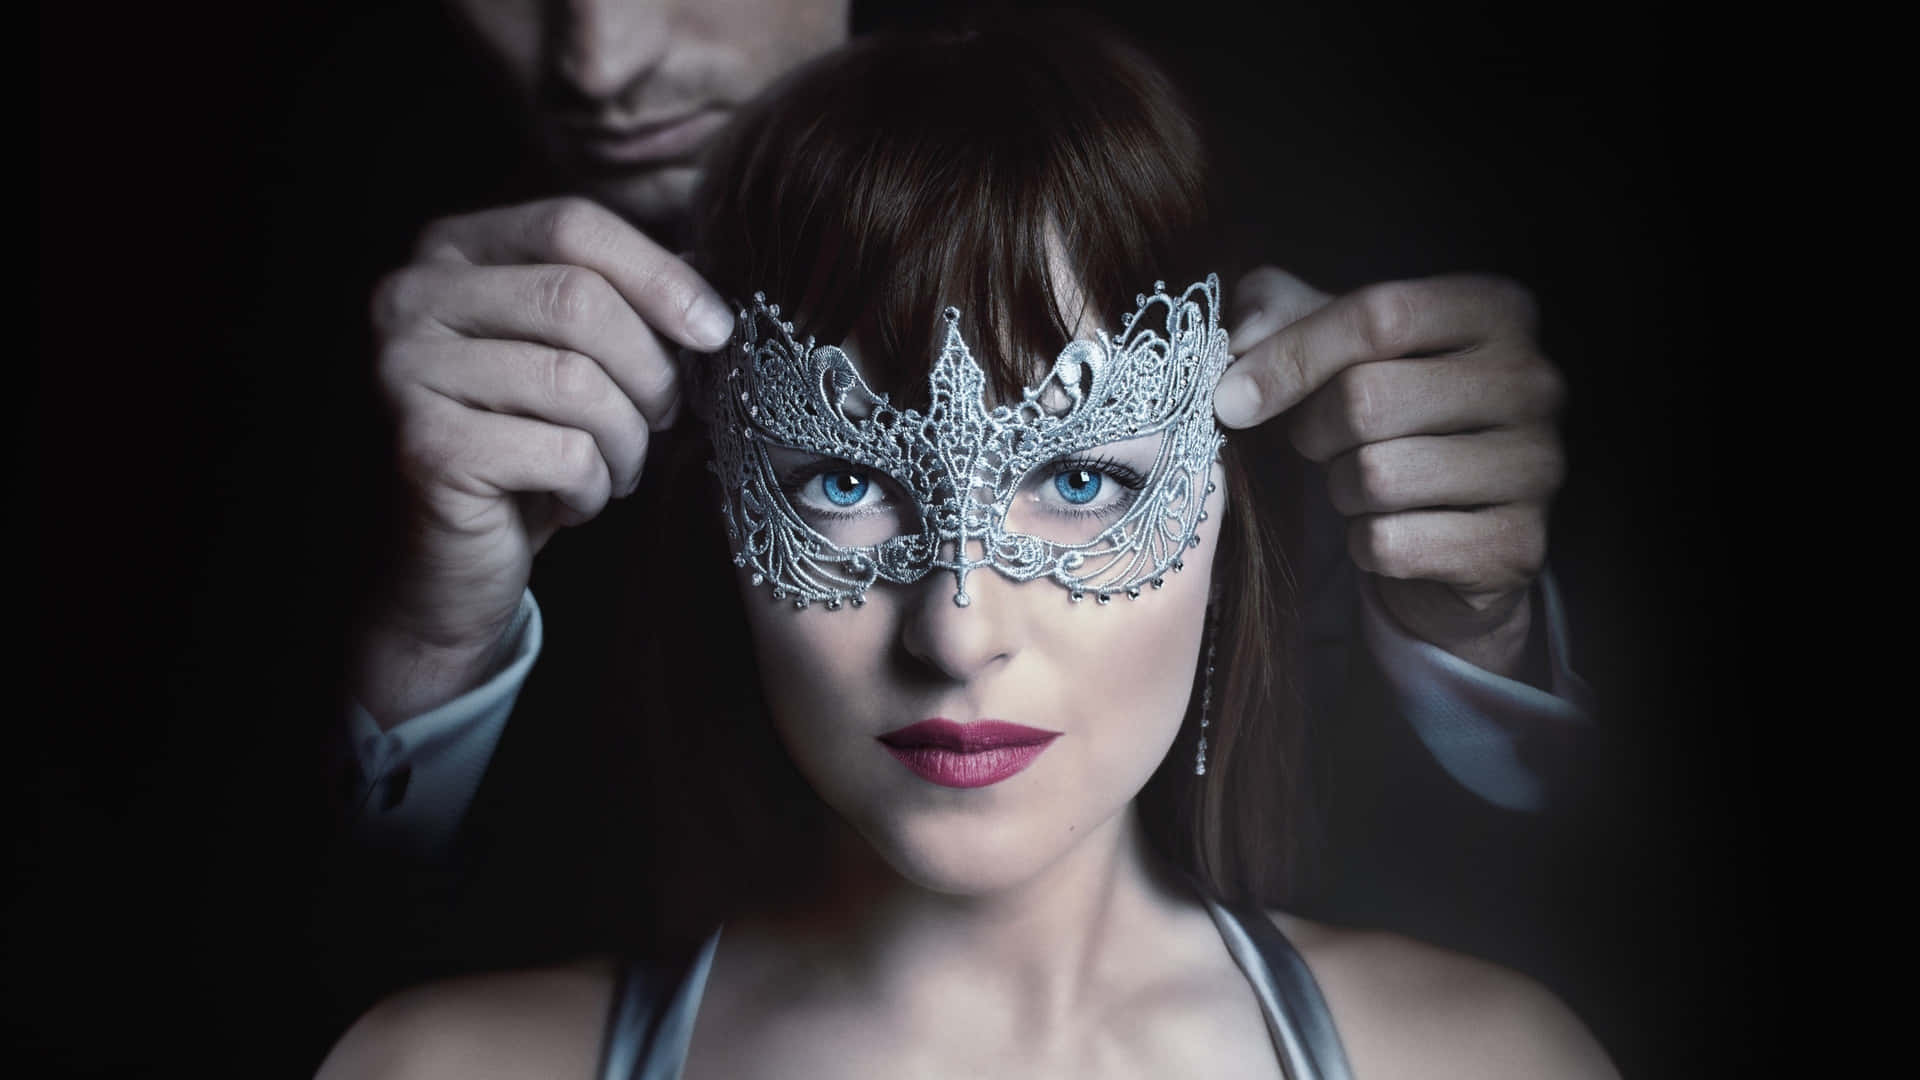 Anastasia With Mask From Fifty Shades Of Grey Wallpaper